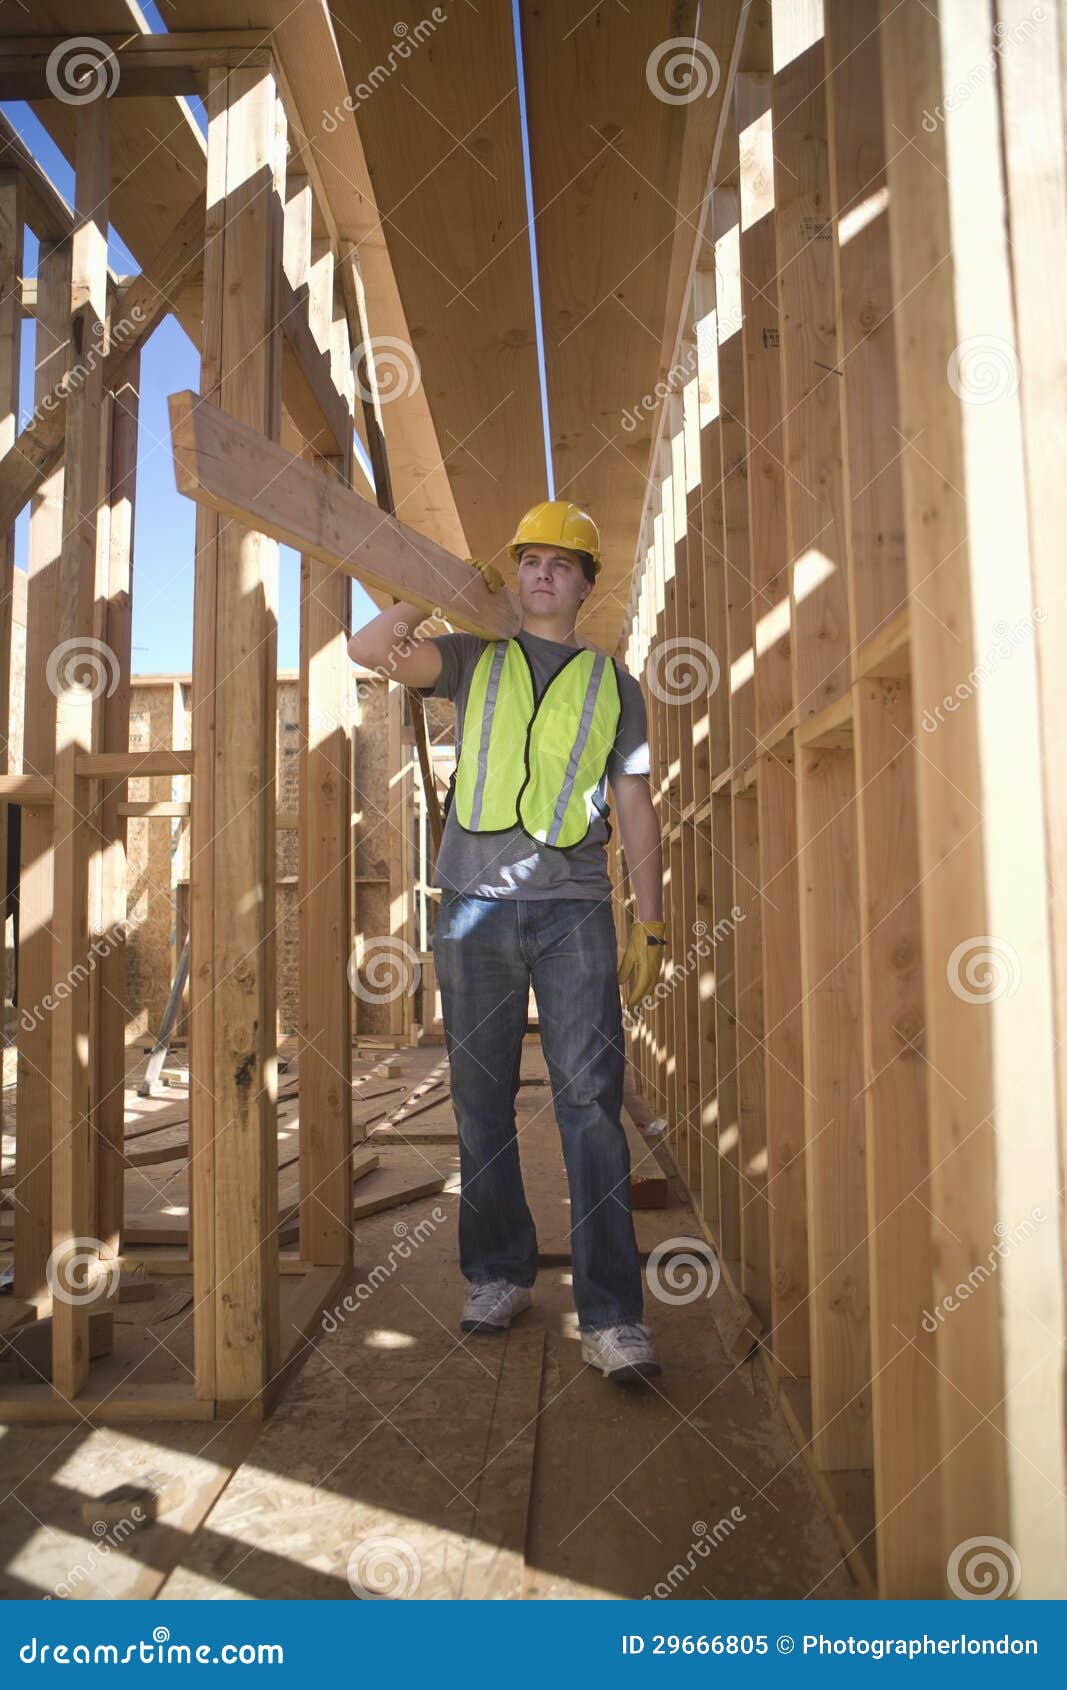 labourer carrying plank of wood